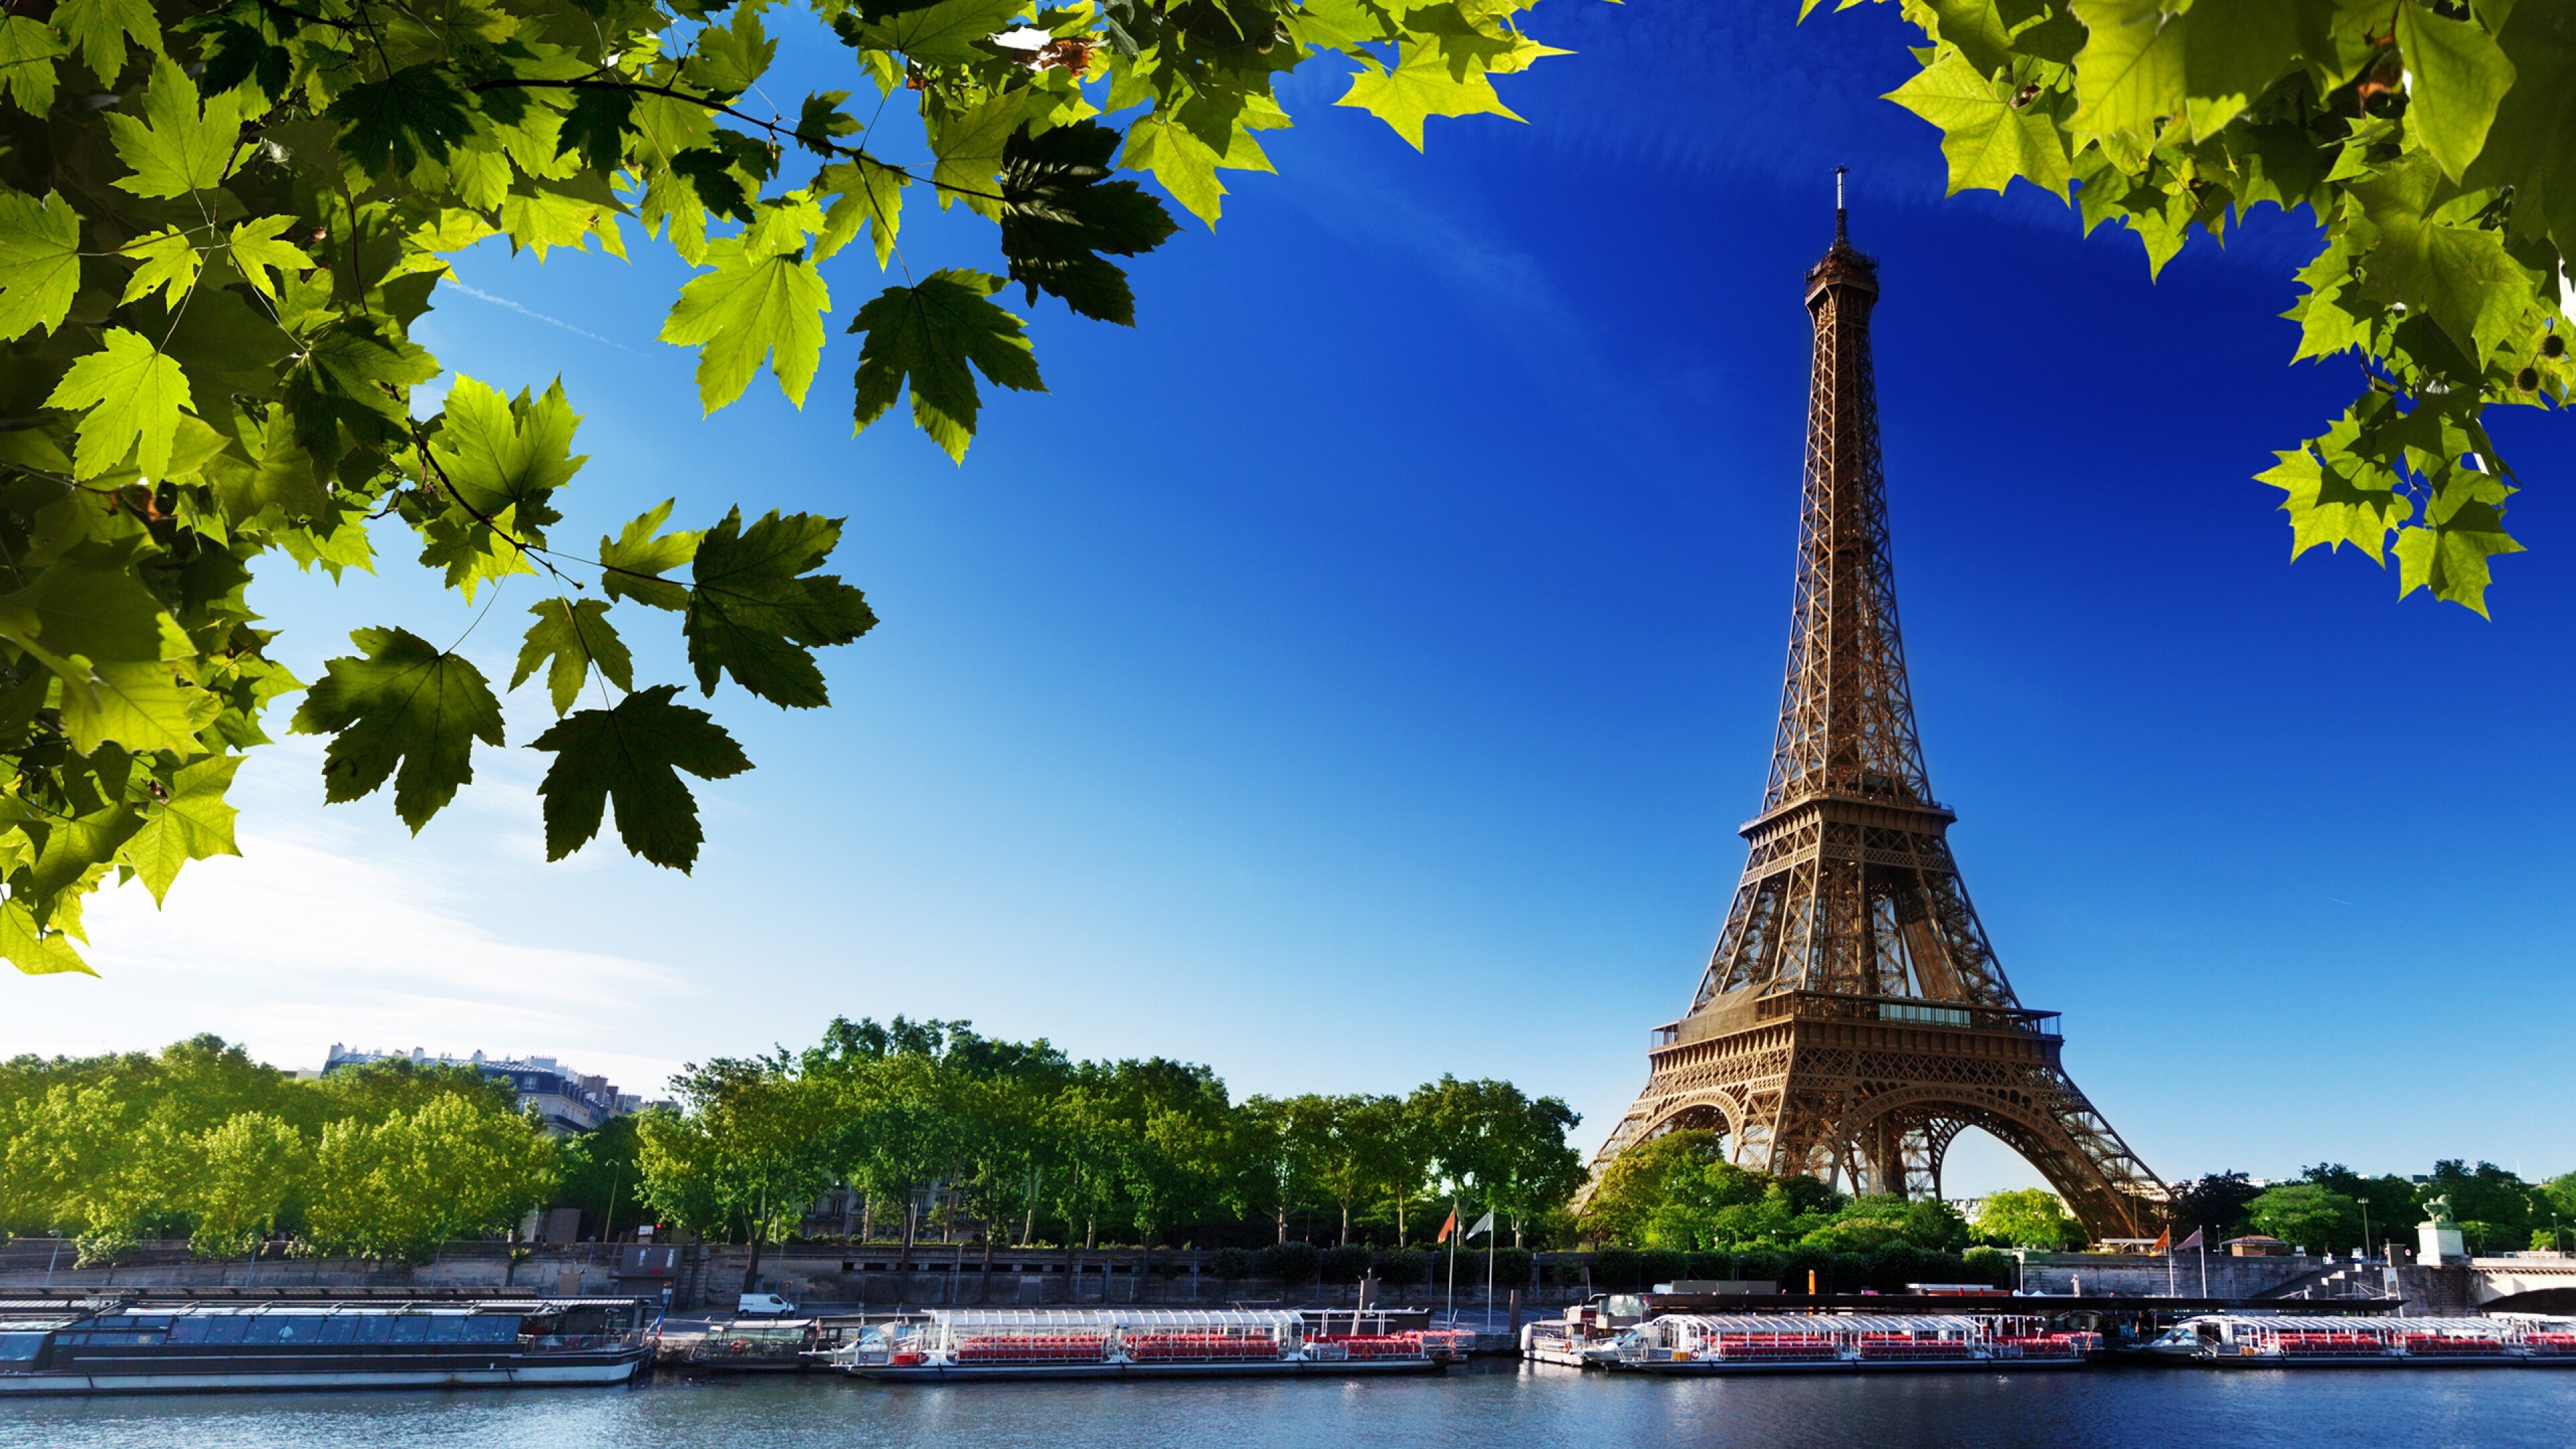 Eiffel Tower: An iron structure located in the Champ de Mars in Paris, Tourist attraction. 3840x2160 4K Background.